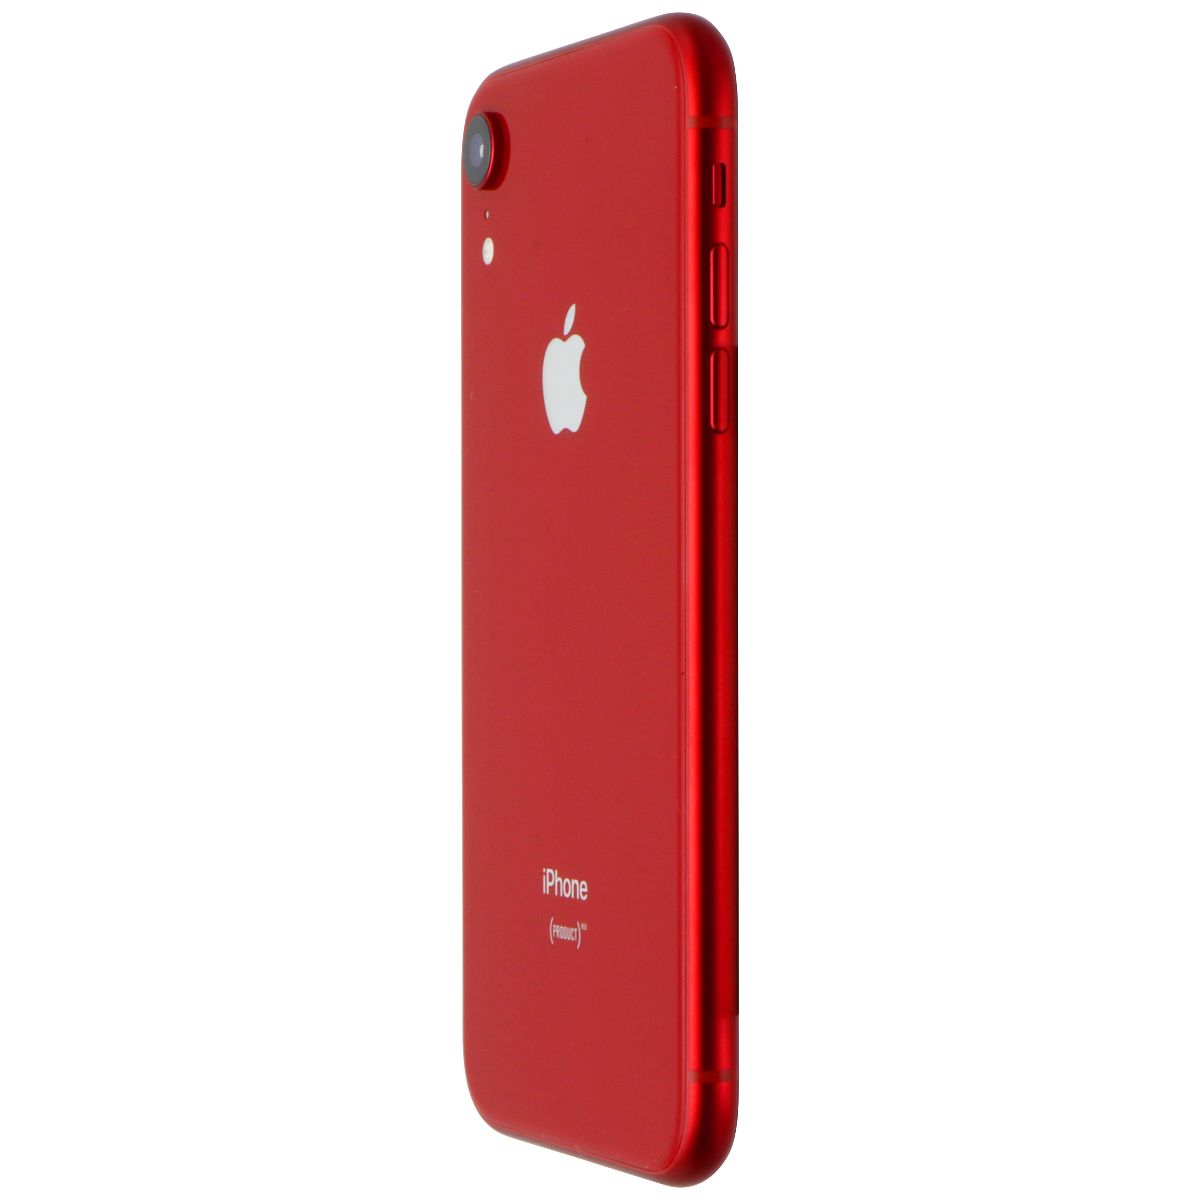 Apple iPhone XR (6.1-inch) (A1984) Unlocked - 64GB / Product RED - Bad –  Simple Cell Bulk